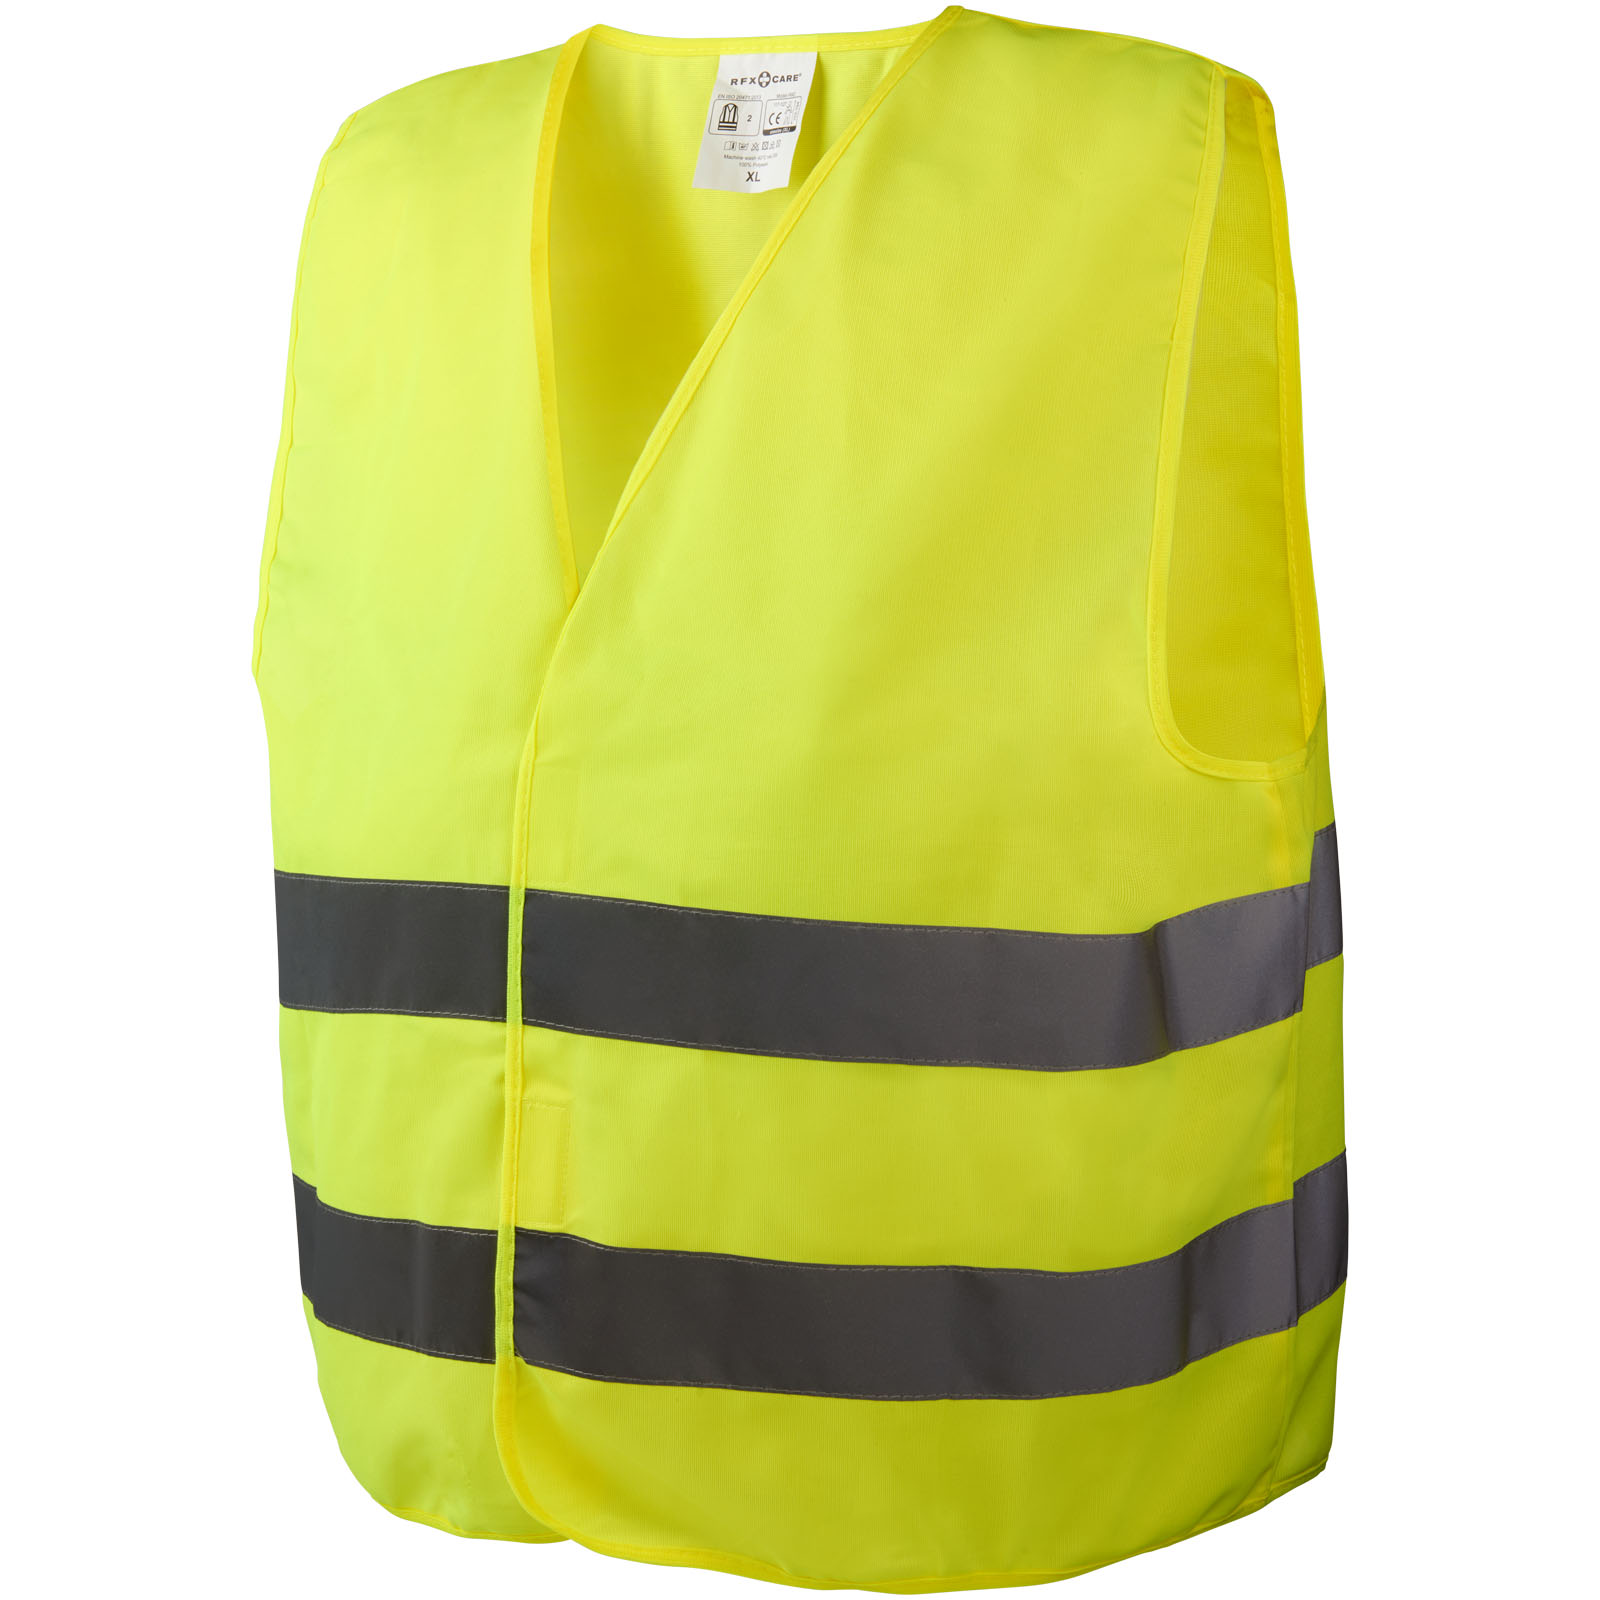 NightGlow Safety Vest - Abbots Langley - Beer